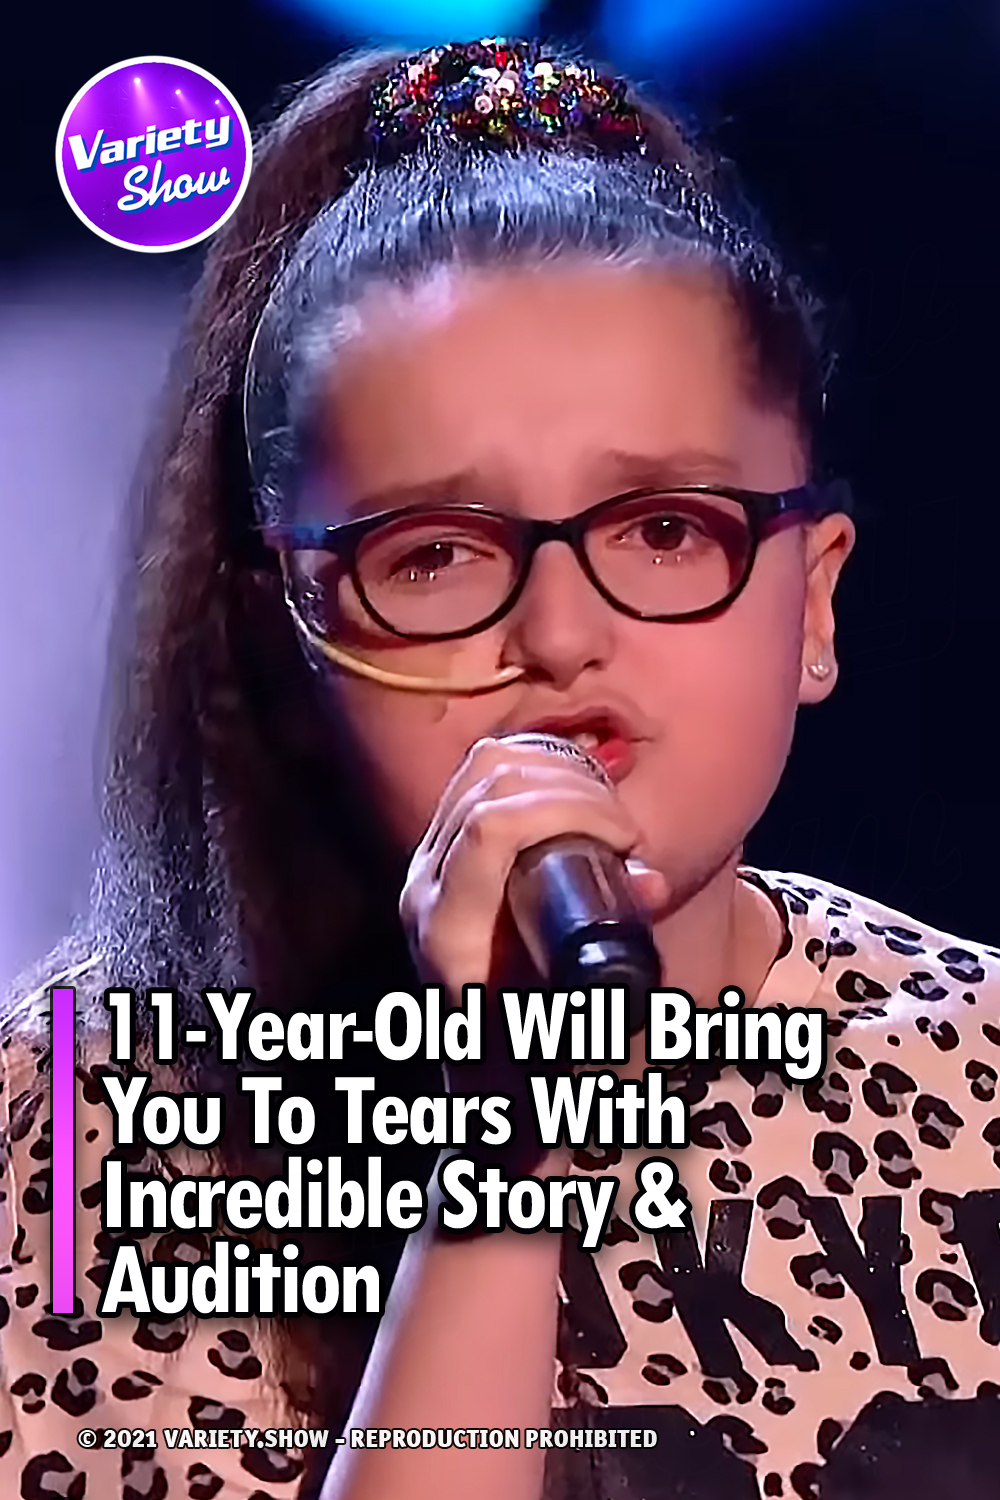 11-Year-Old Will Bring You To Tears With Incredible Story & Audition